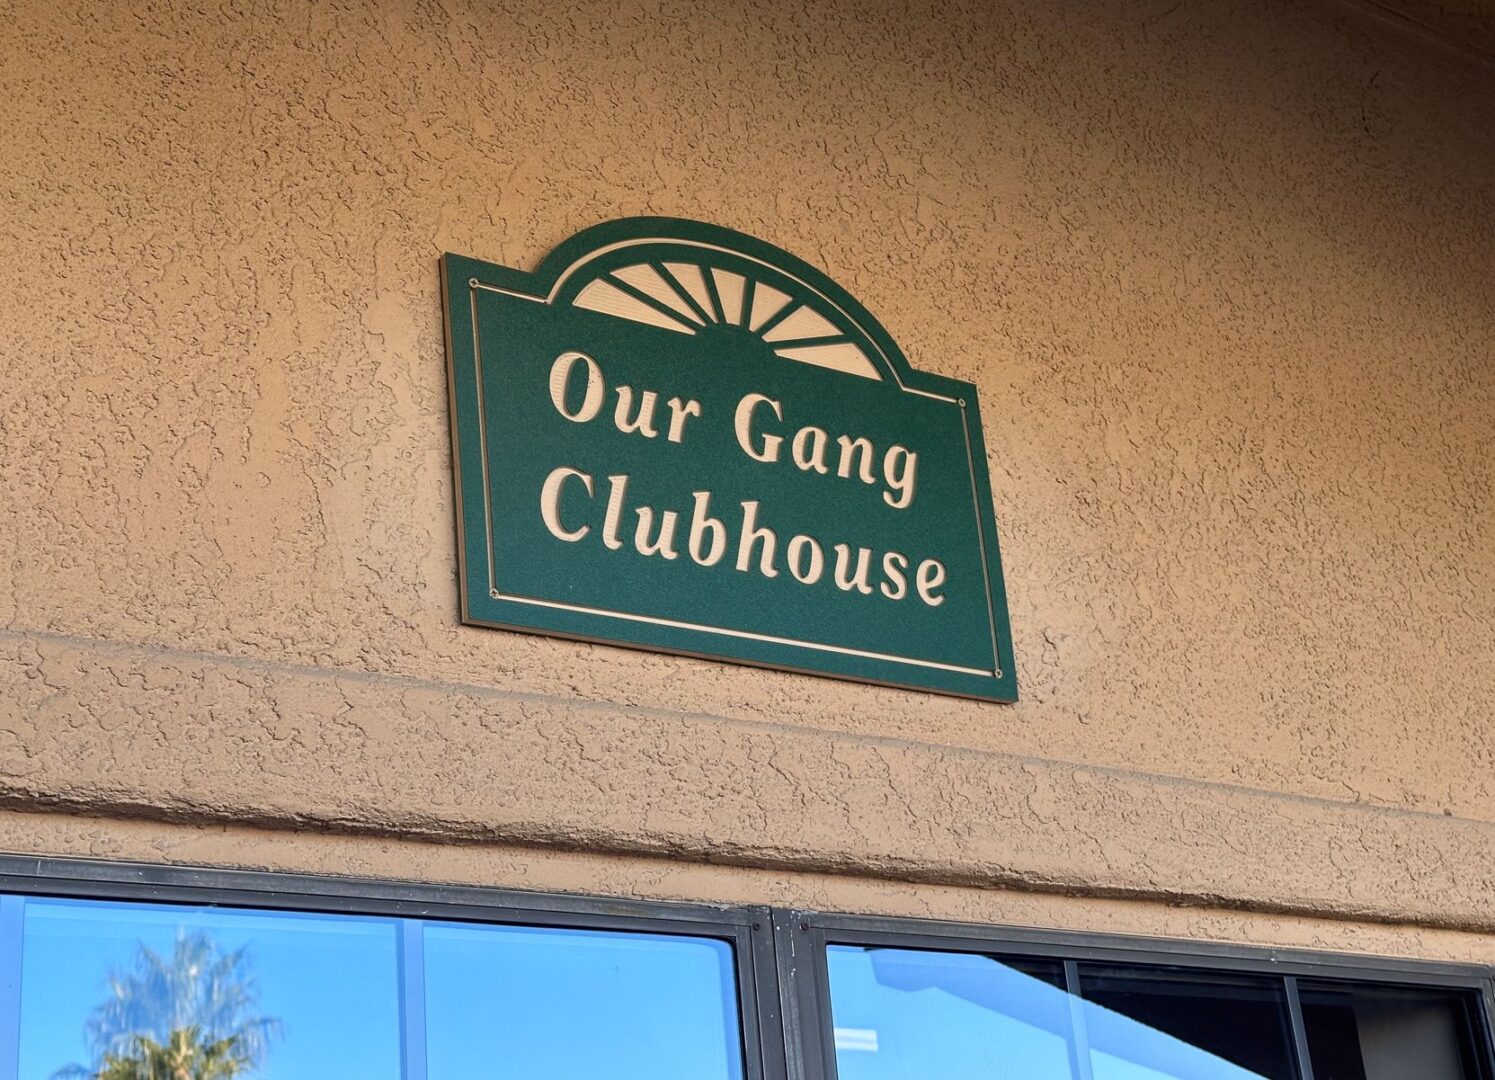 Our gang clubhouse sign.